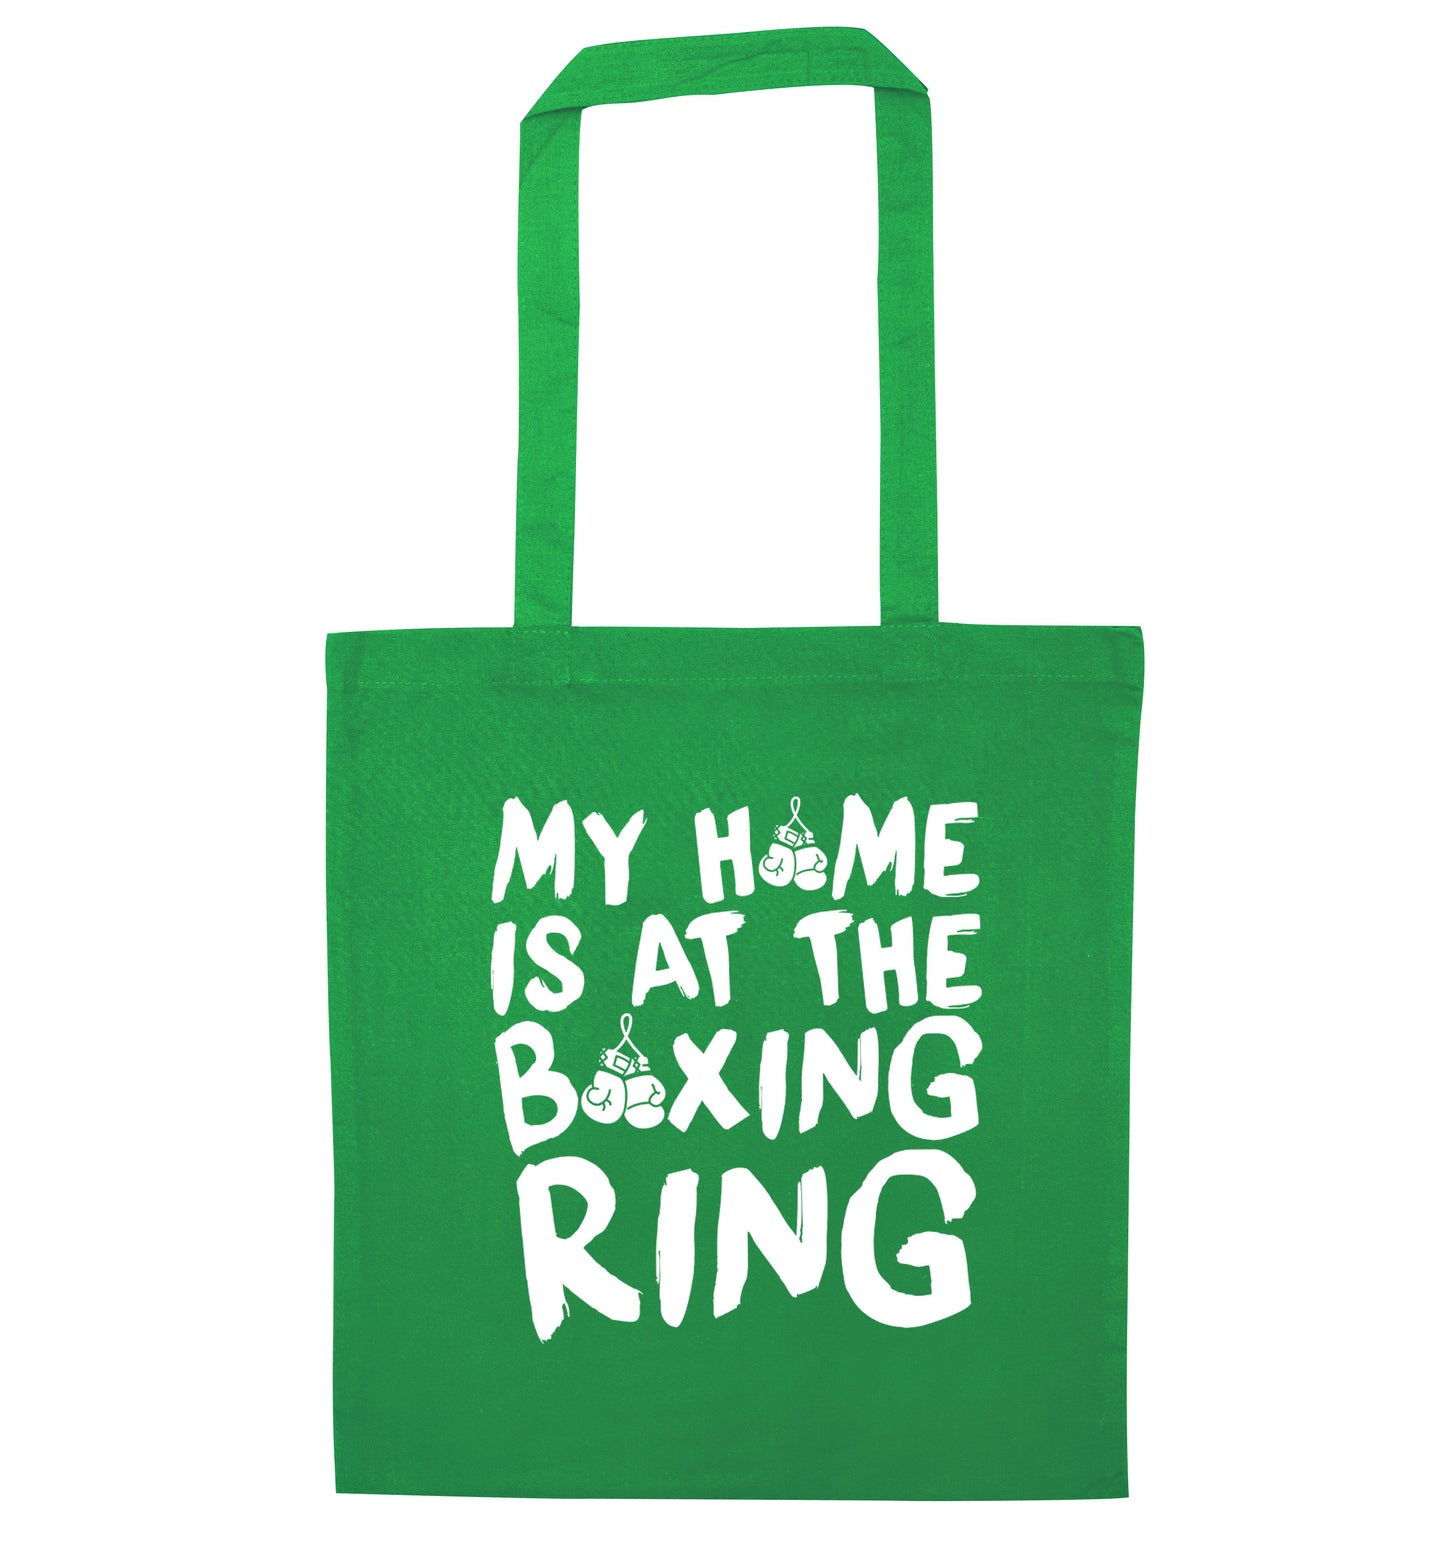 My home is at the boxing ring green tote bag